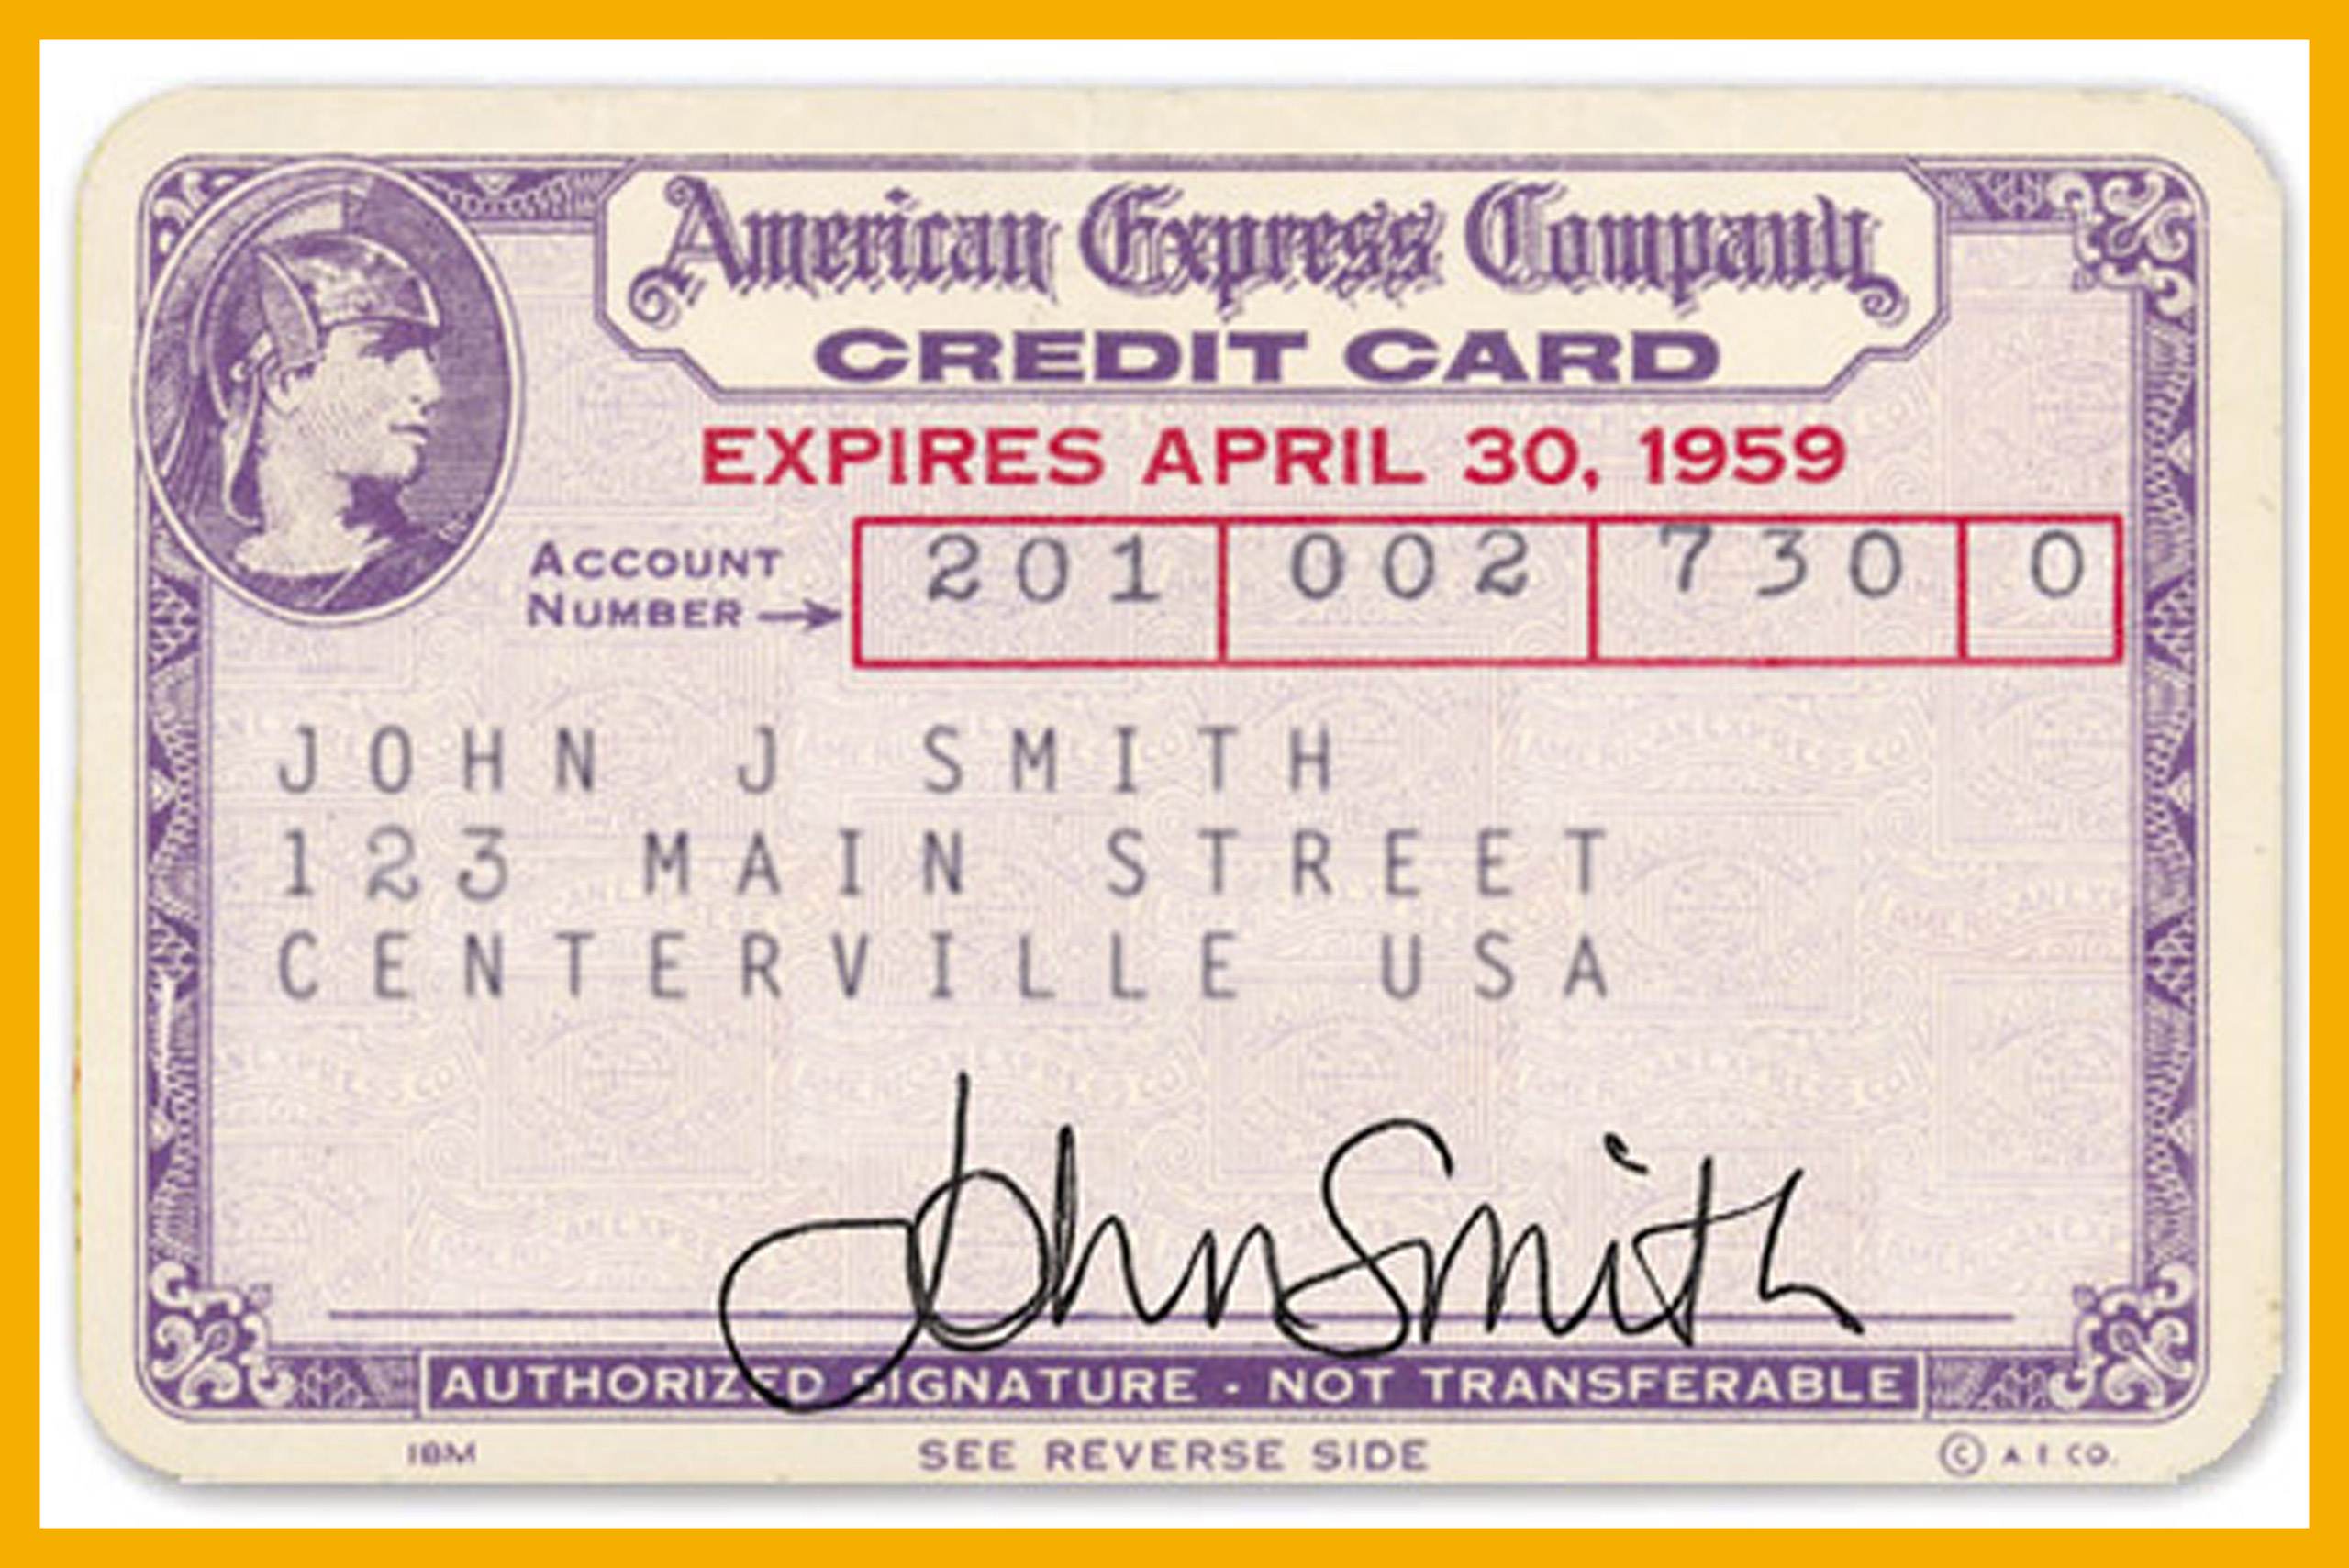 1959 American Express Credit Card. (Apic—Getty Images)